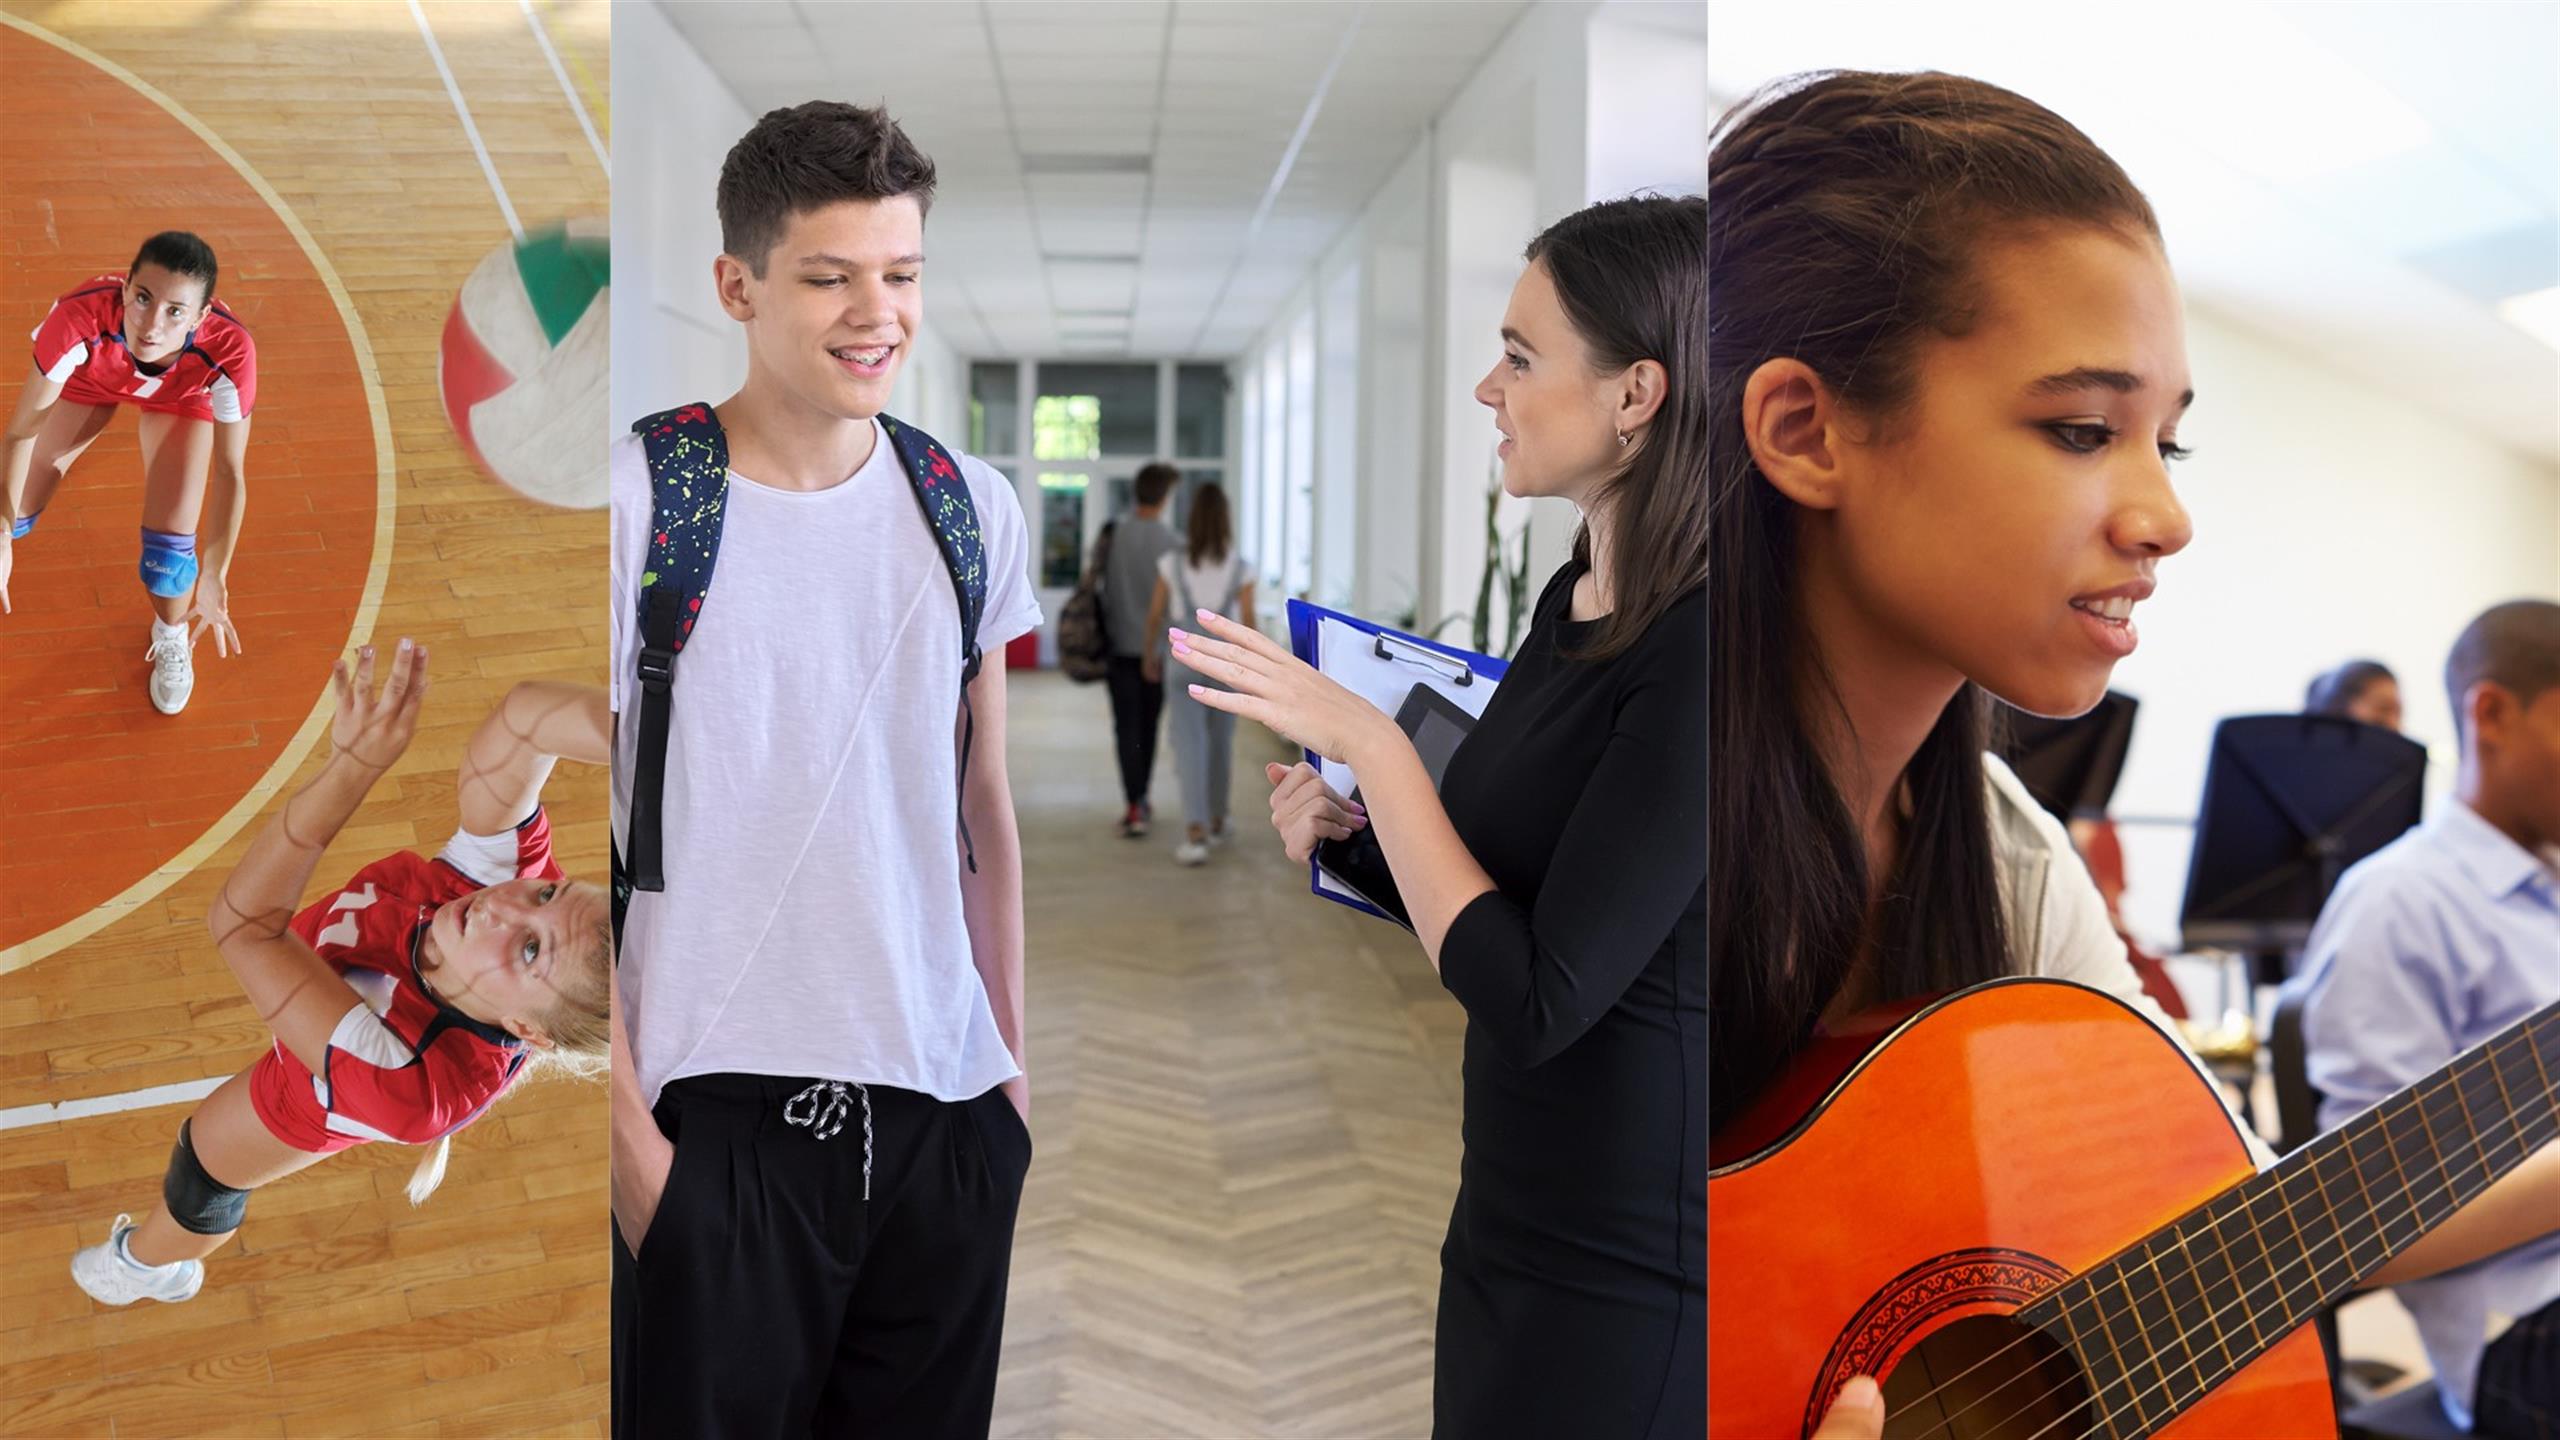 photo collage of a basketball team, someone talking at school and a girl playing guitar